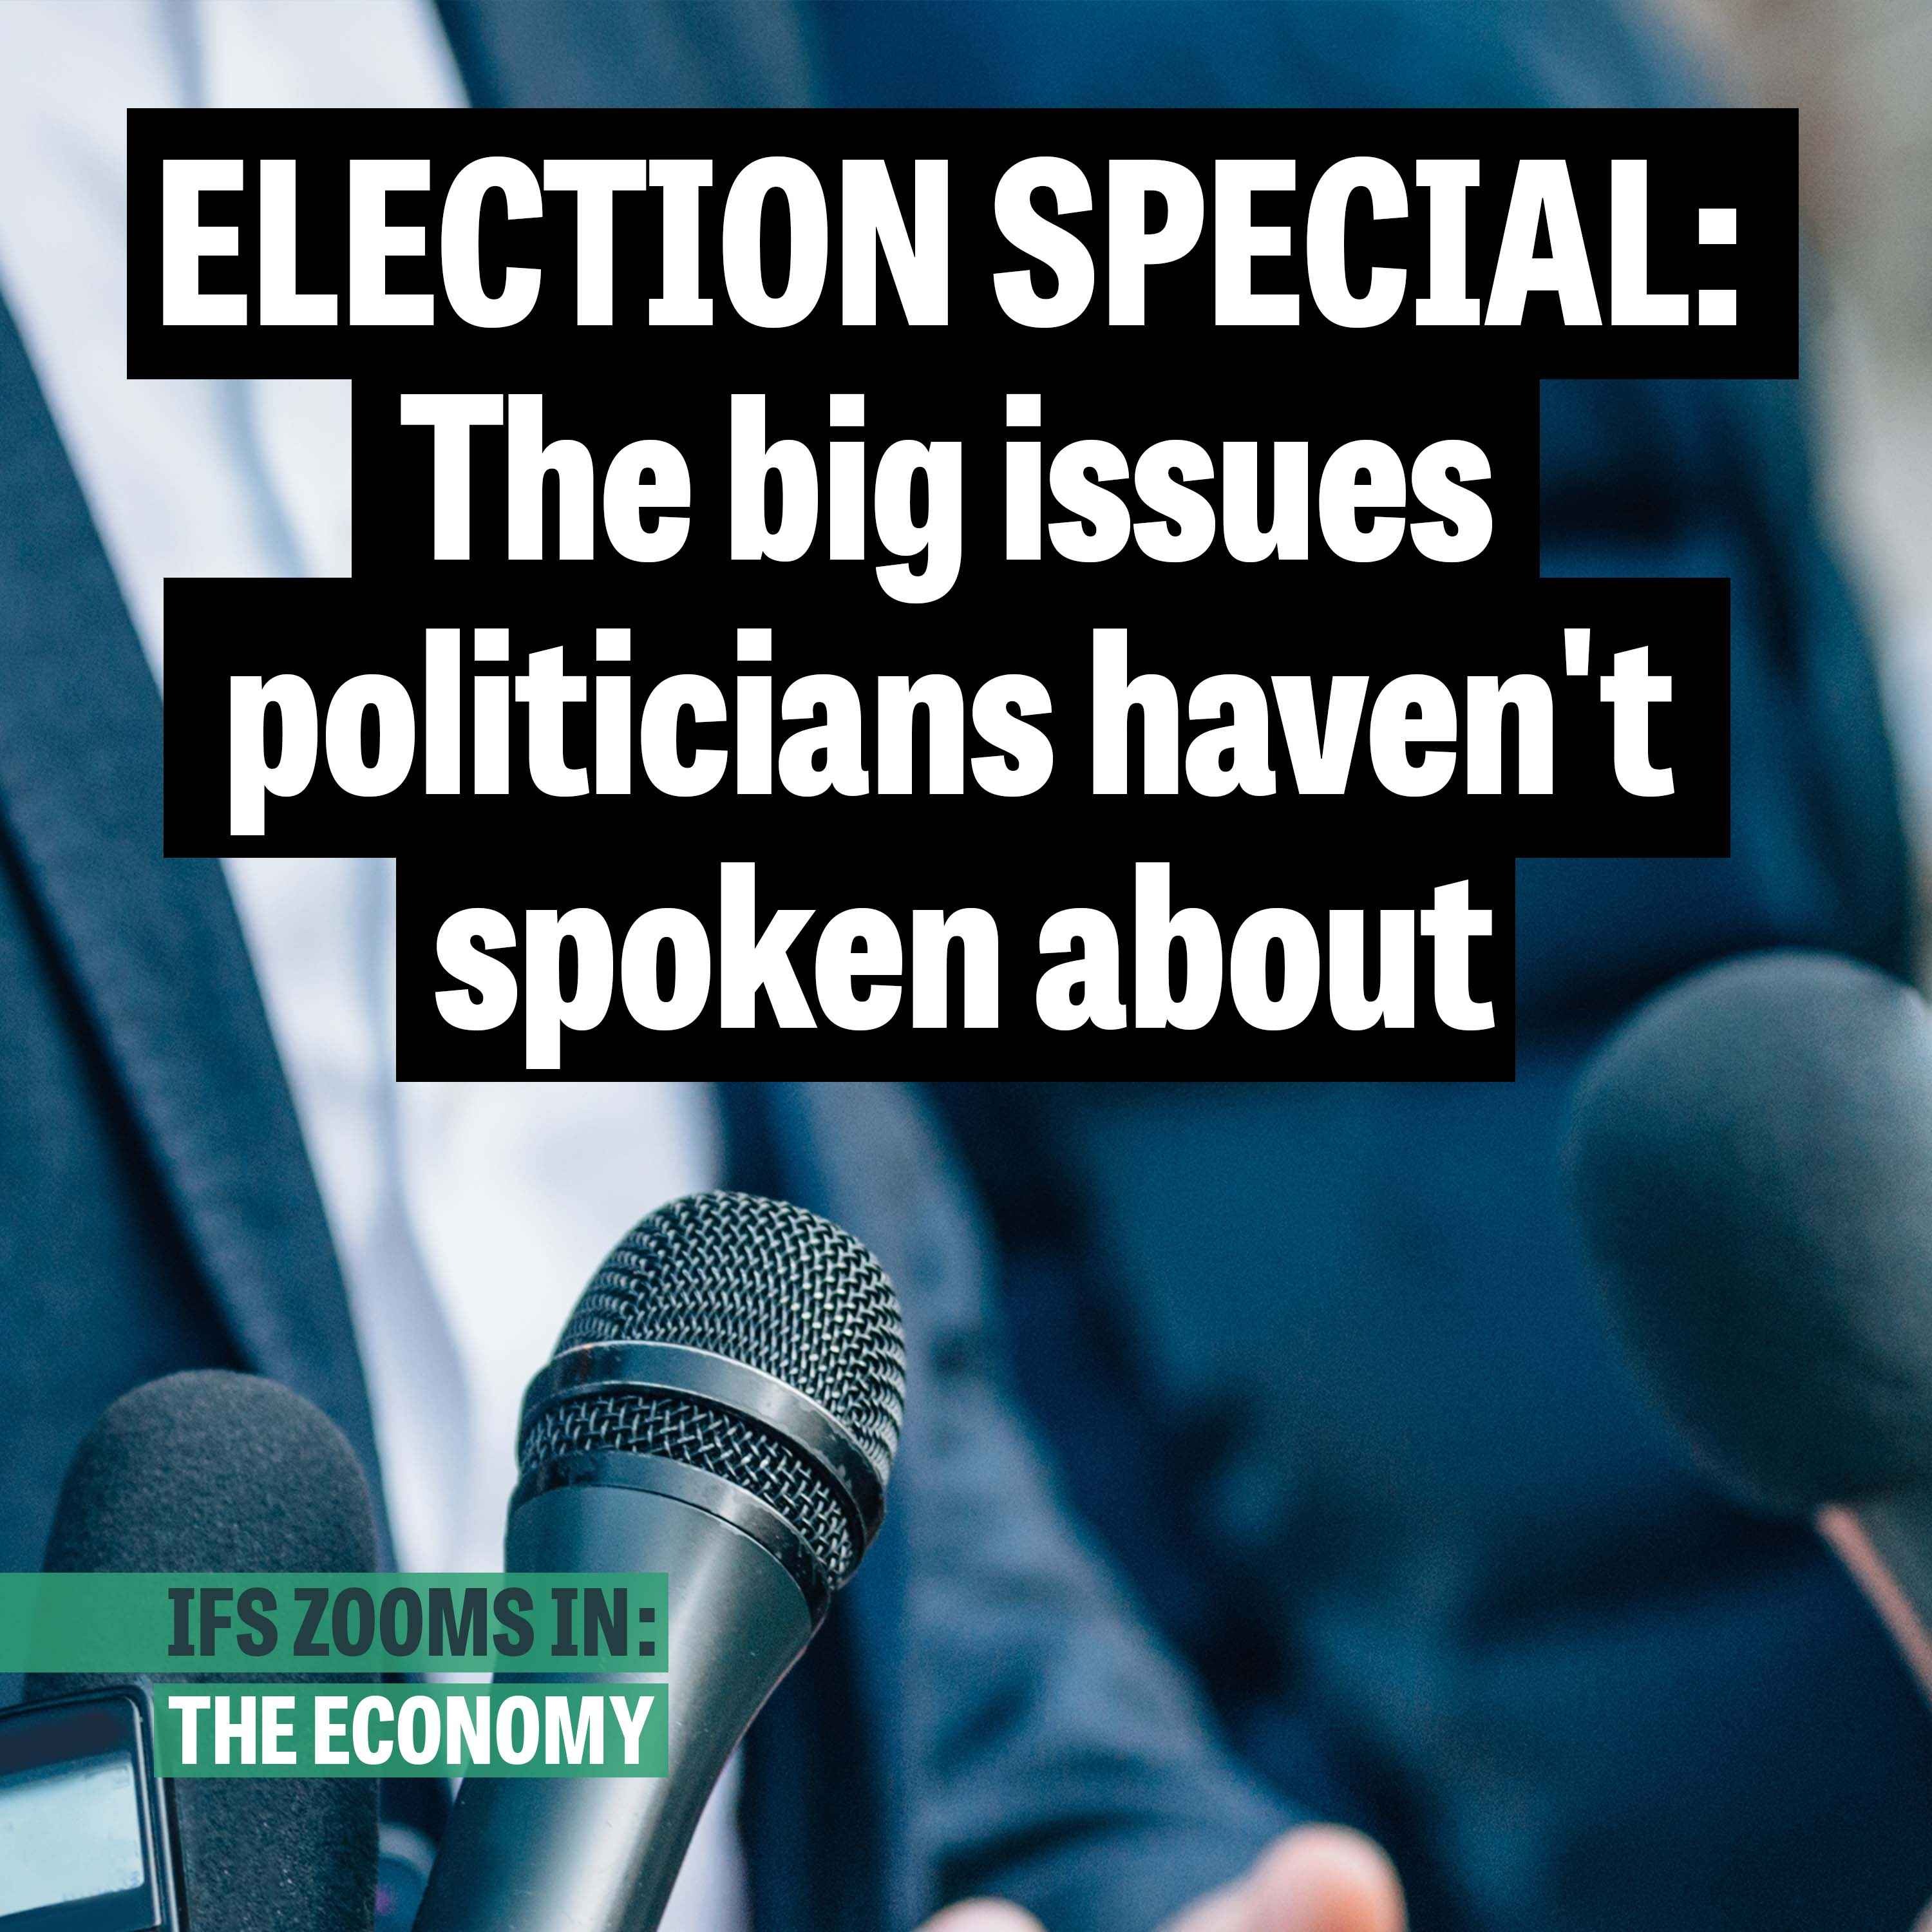 ELECTION SPECIAL: The big issues politicians haven't spoken about